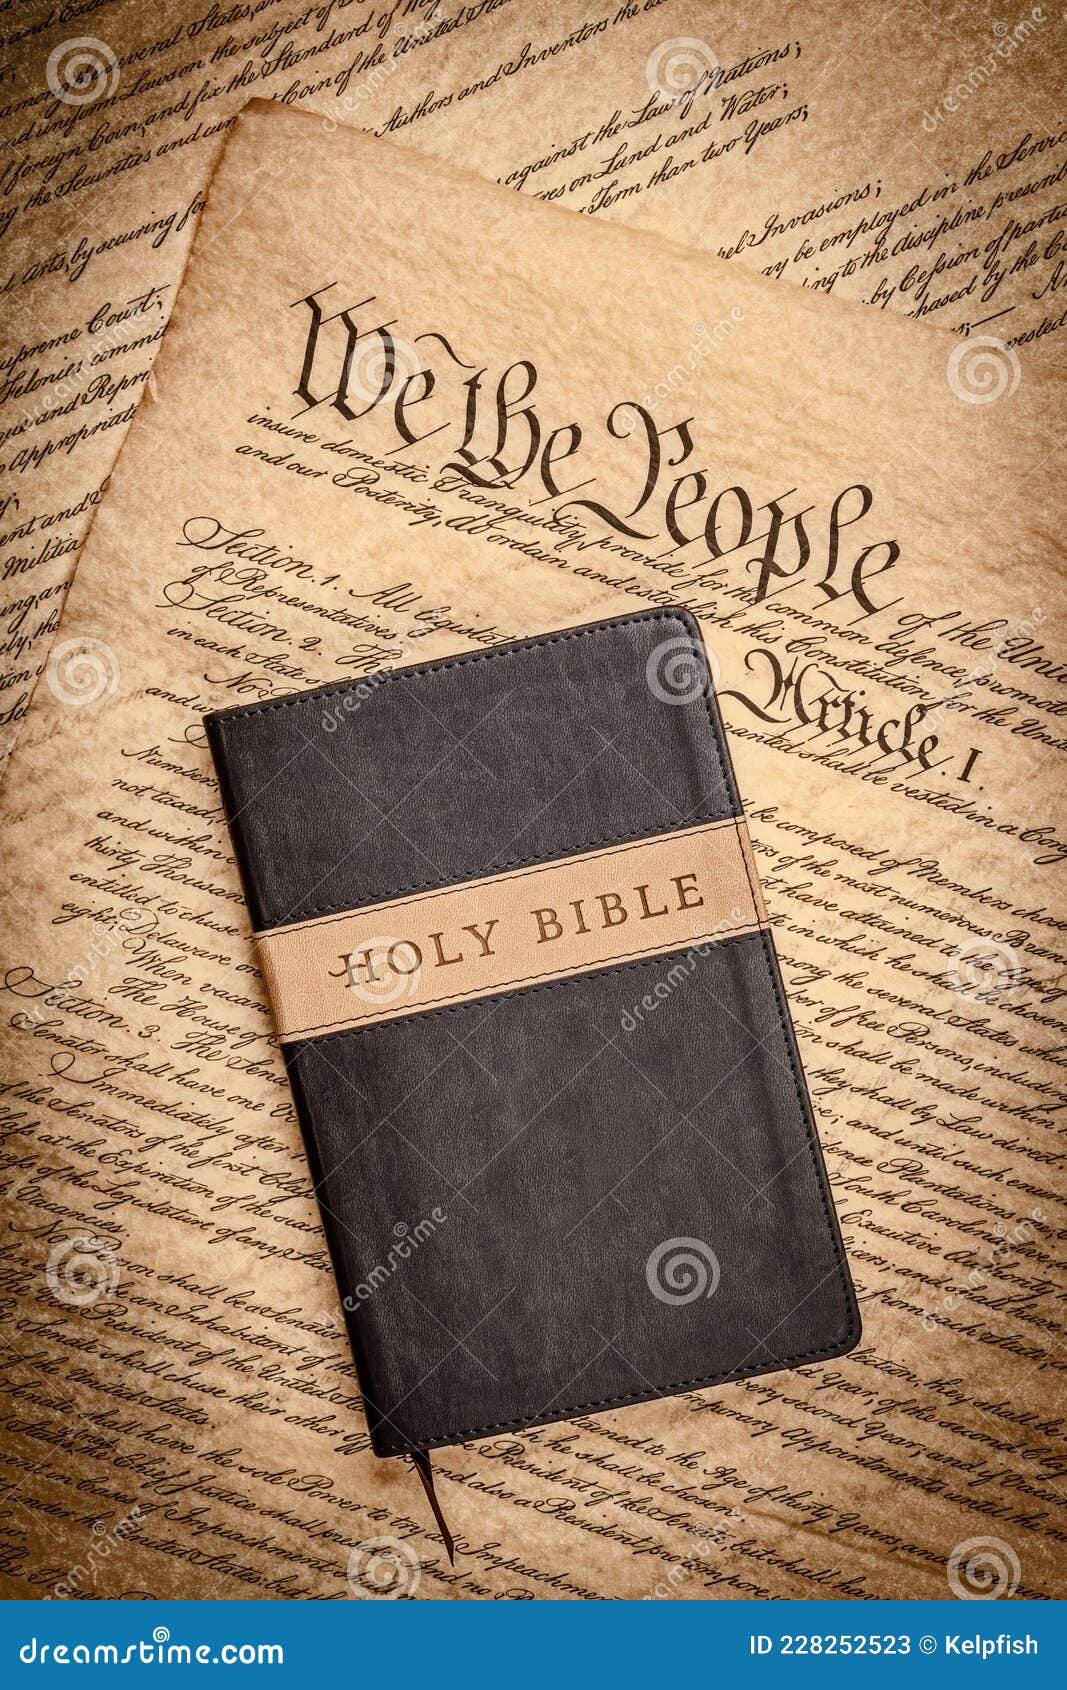 holy bible and small cross on the constitution